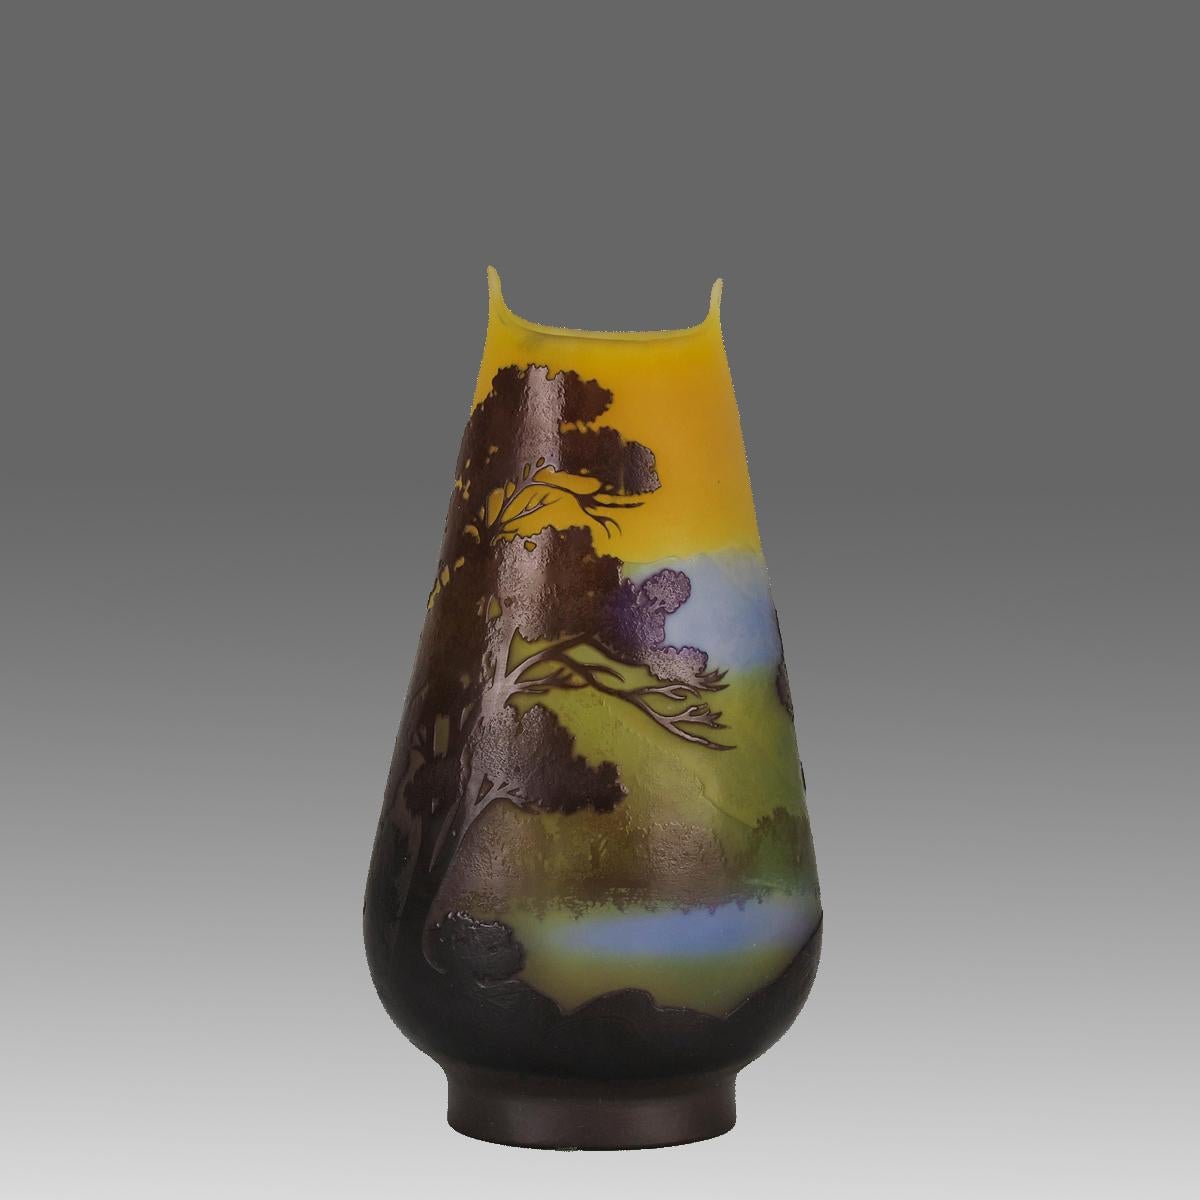 A spectacular late 19th Century French cameo glass vase of Art Nouveau form with layered colours of deep purple, blue, green and yellow depicting a lake amidst a tree lined landscape, signed Gallé.

ADDITIONAL INFORMATION
Height:                    